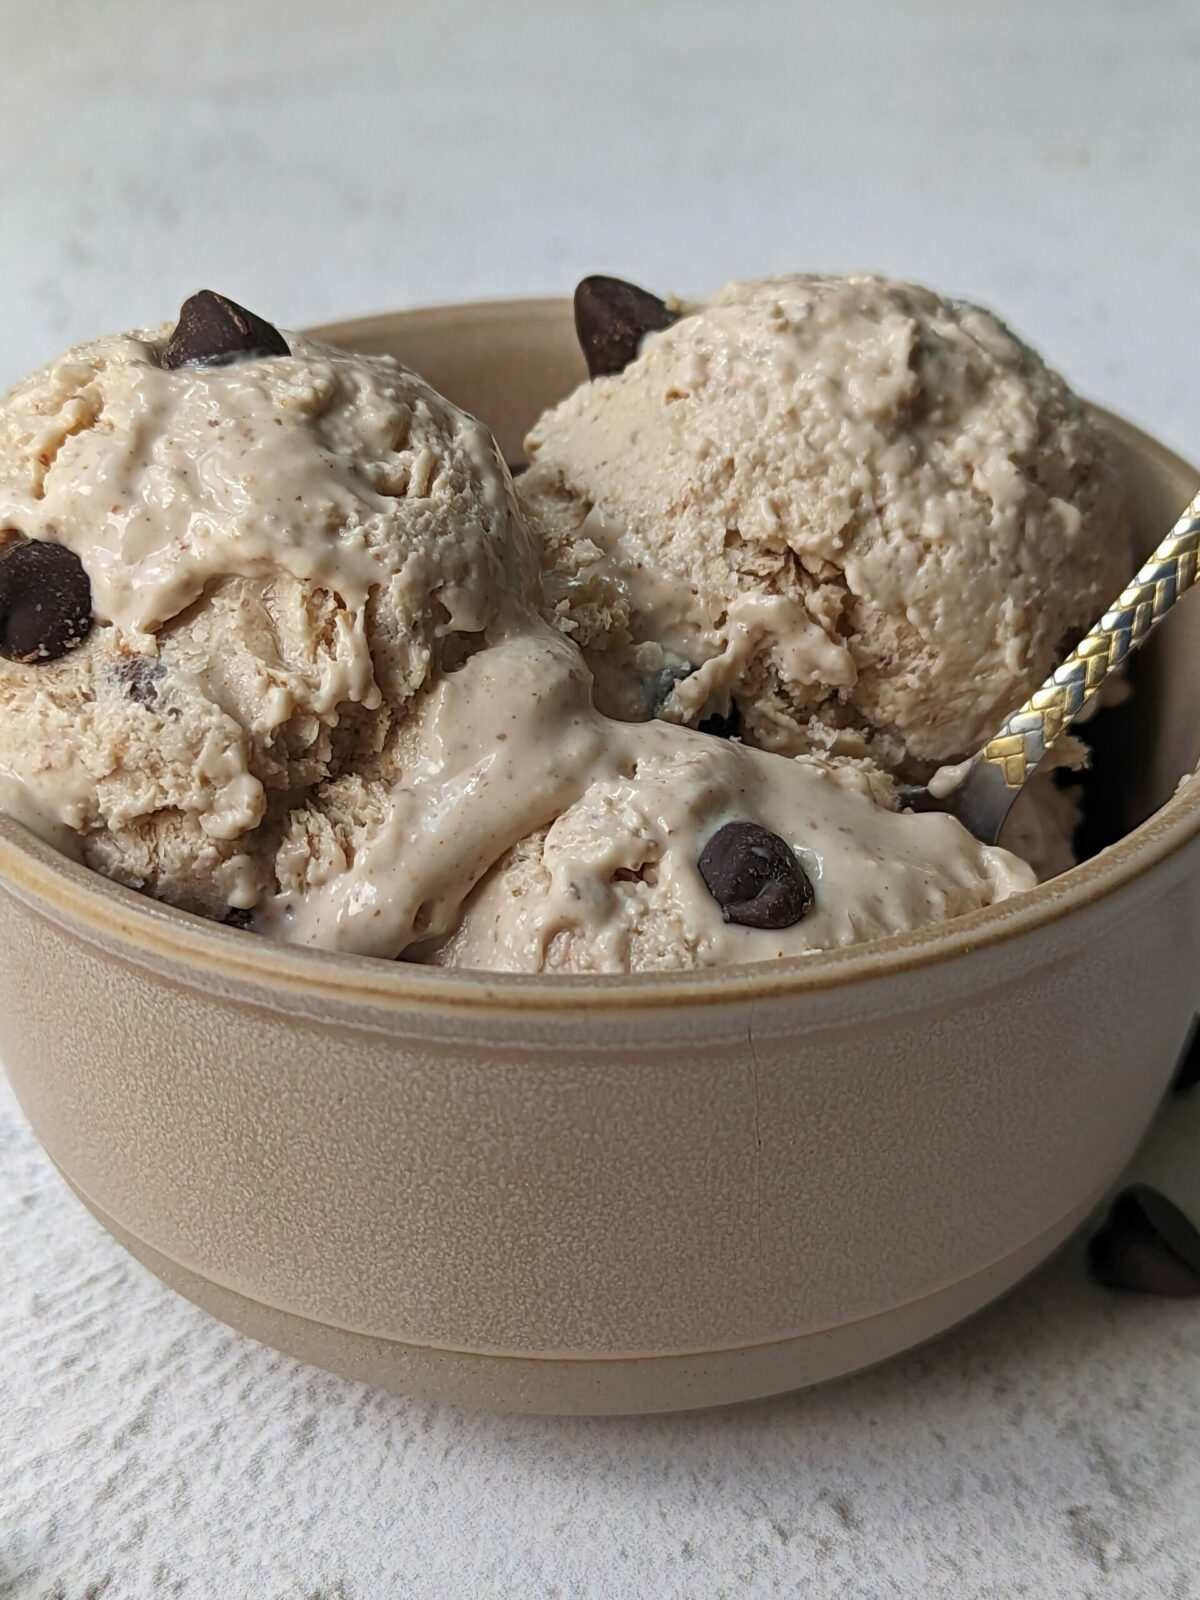 A bowl of cottage cheese ice cream garnished with and surrounded by chocolate chips.